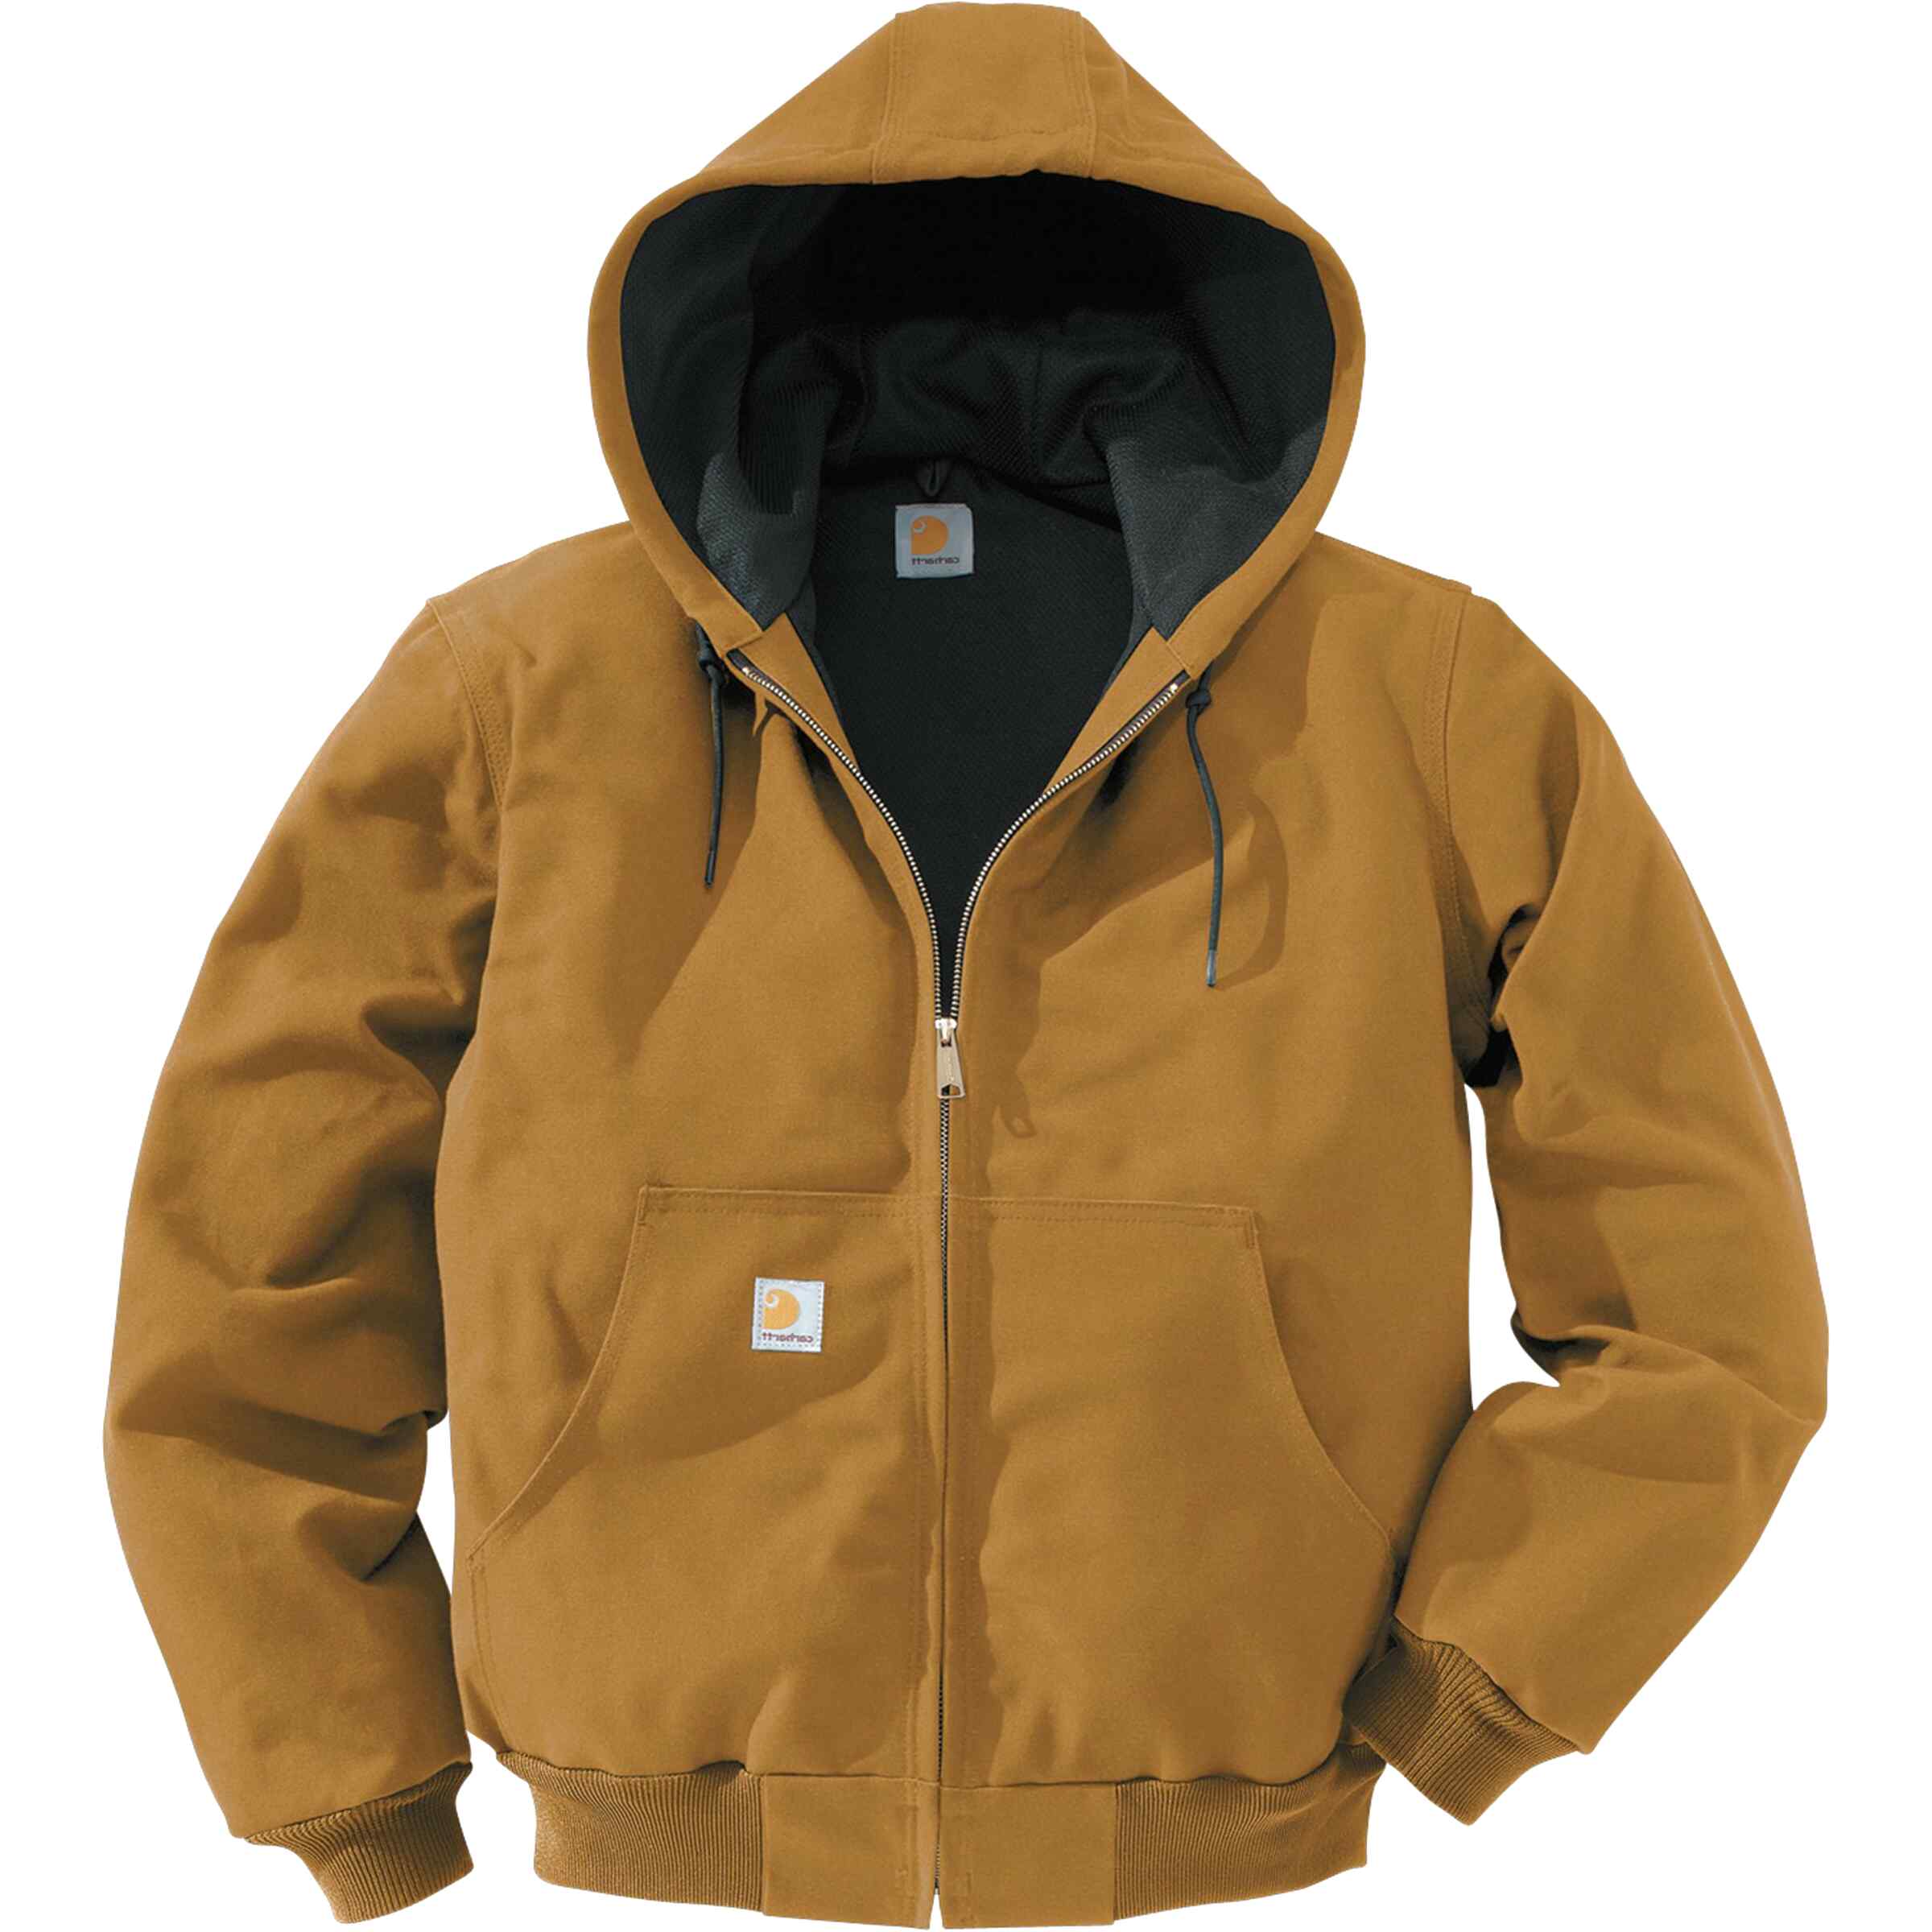 Carhartt for sale in UK | 88 used Carhartts